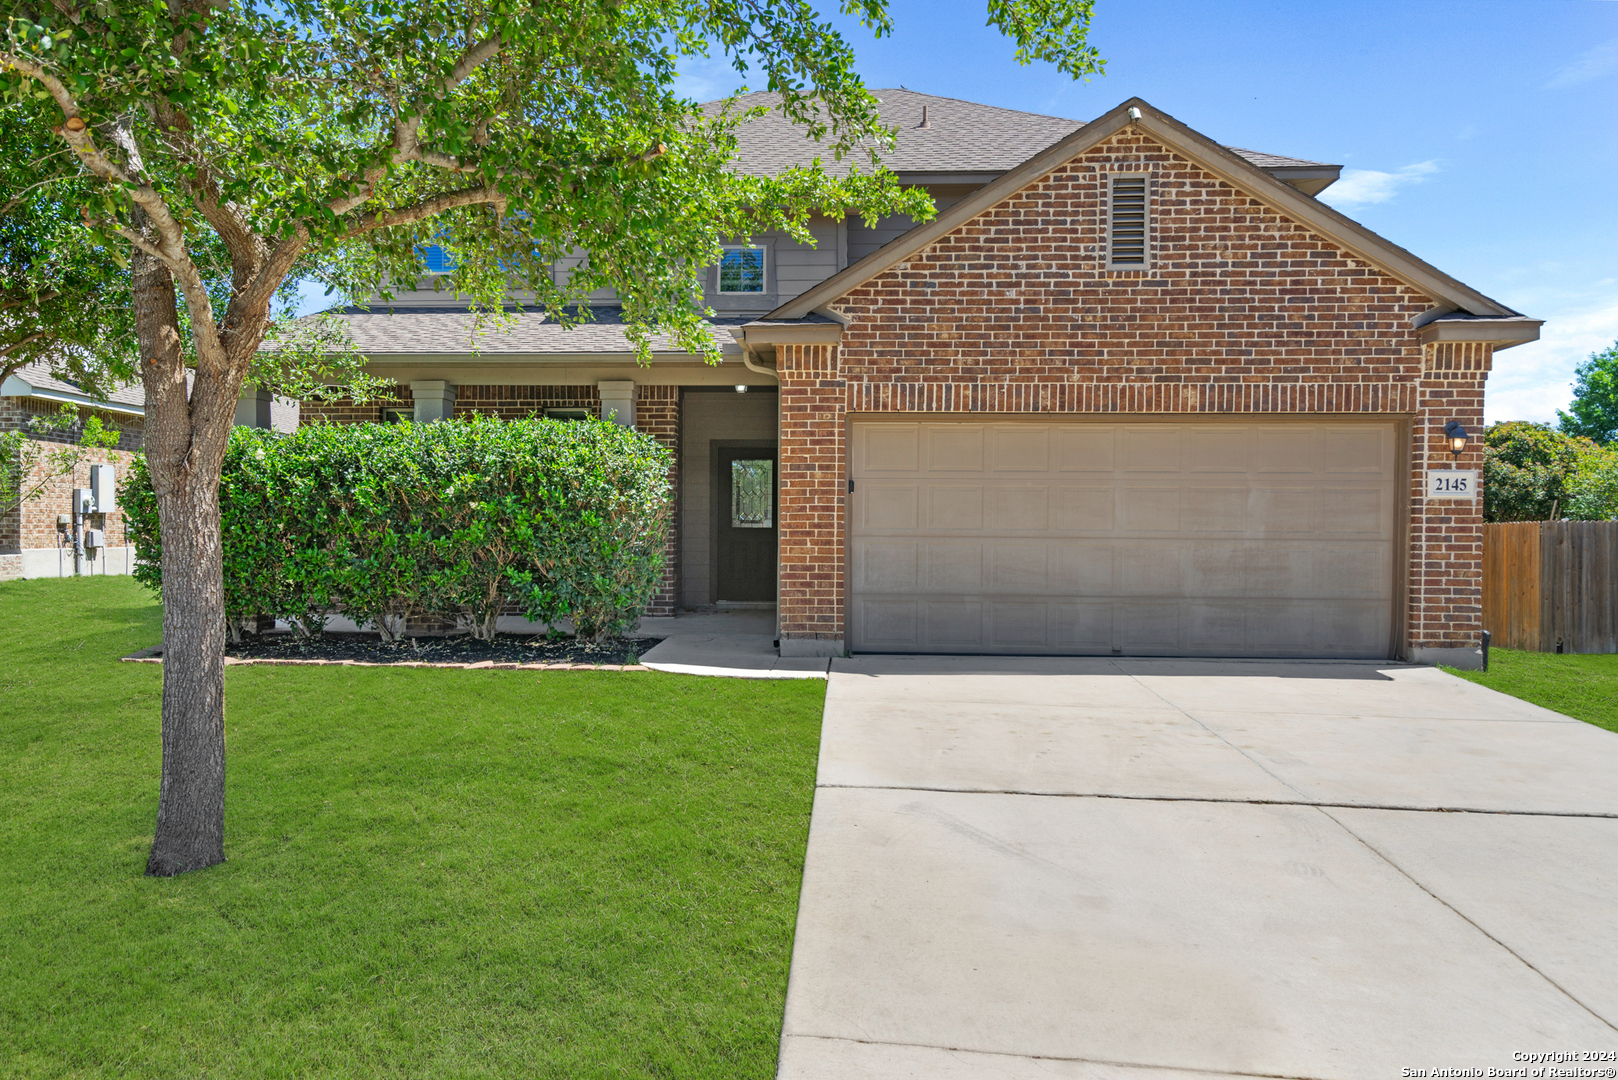 Photo of 2145 Dove Crossing Dr in New Braunfels, TX